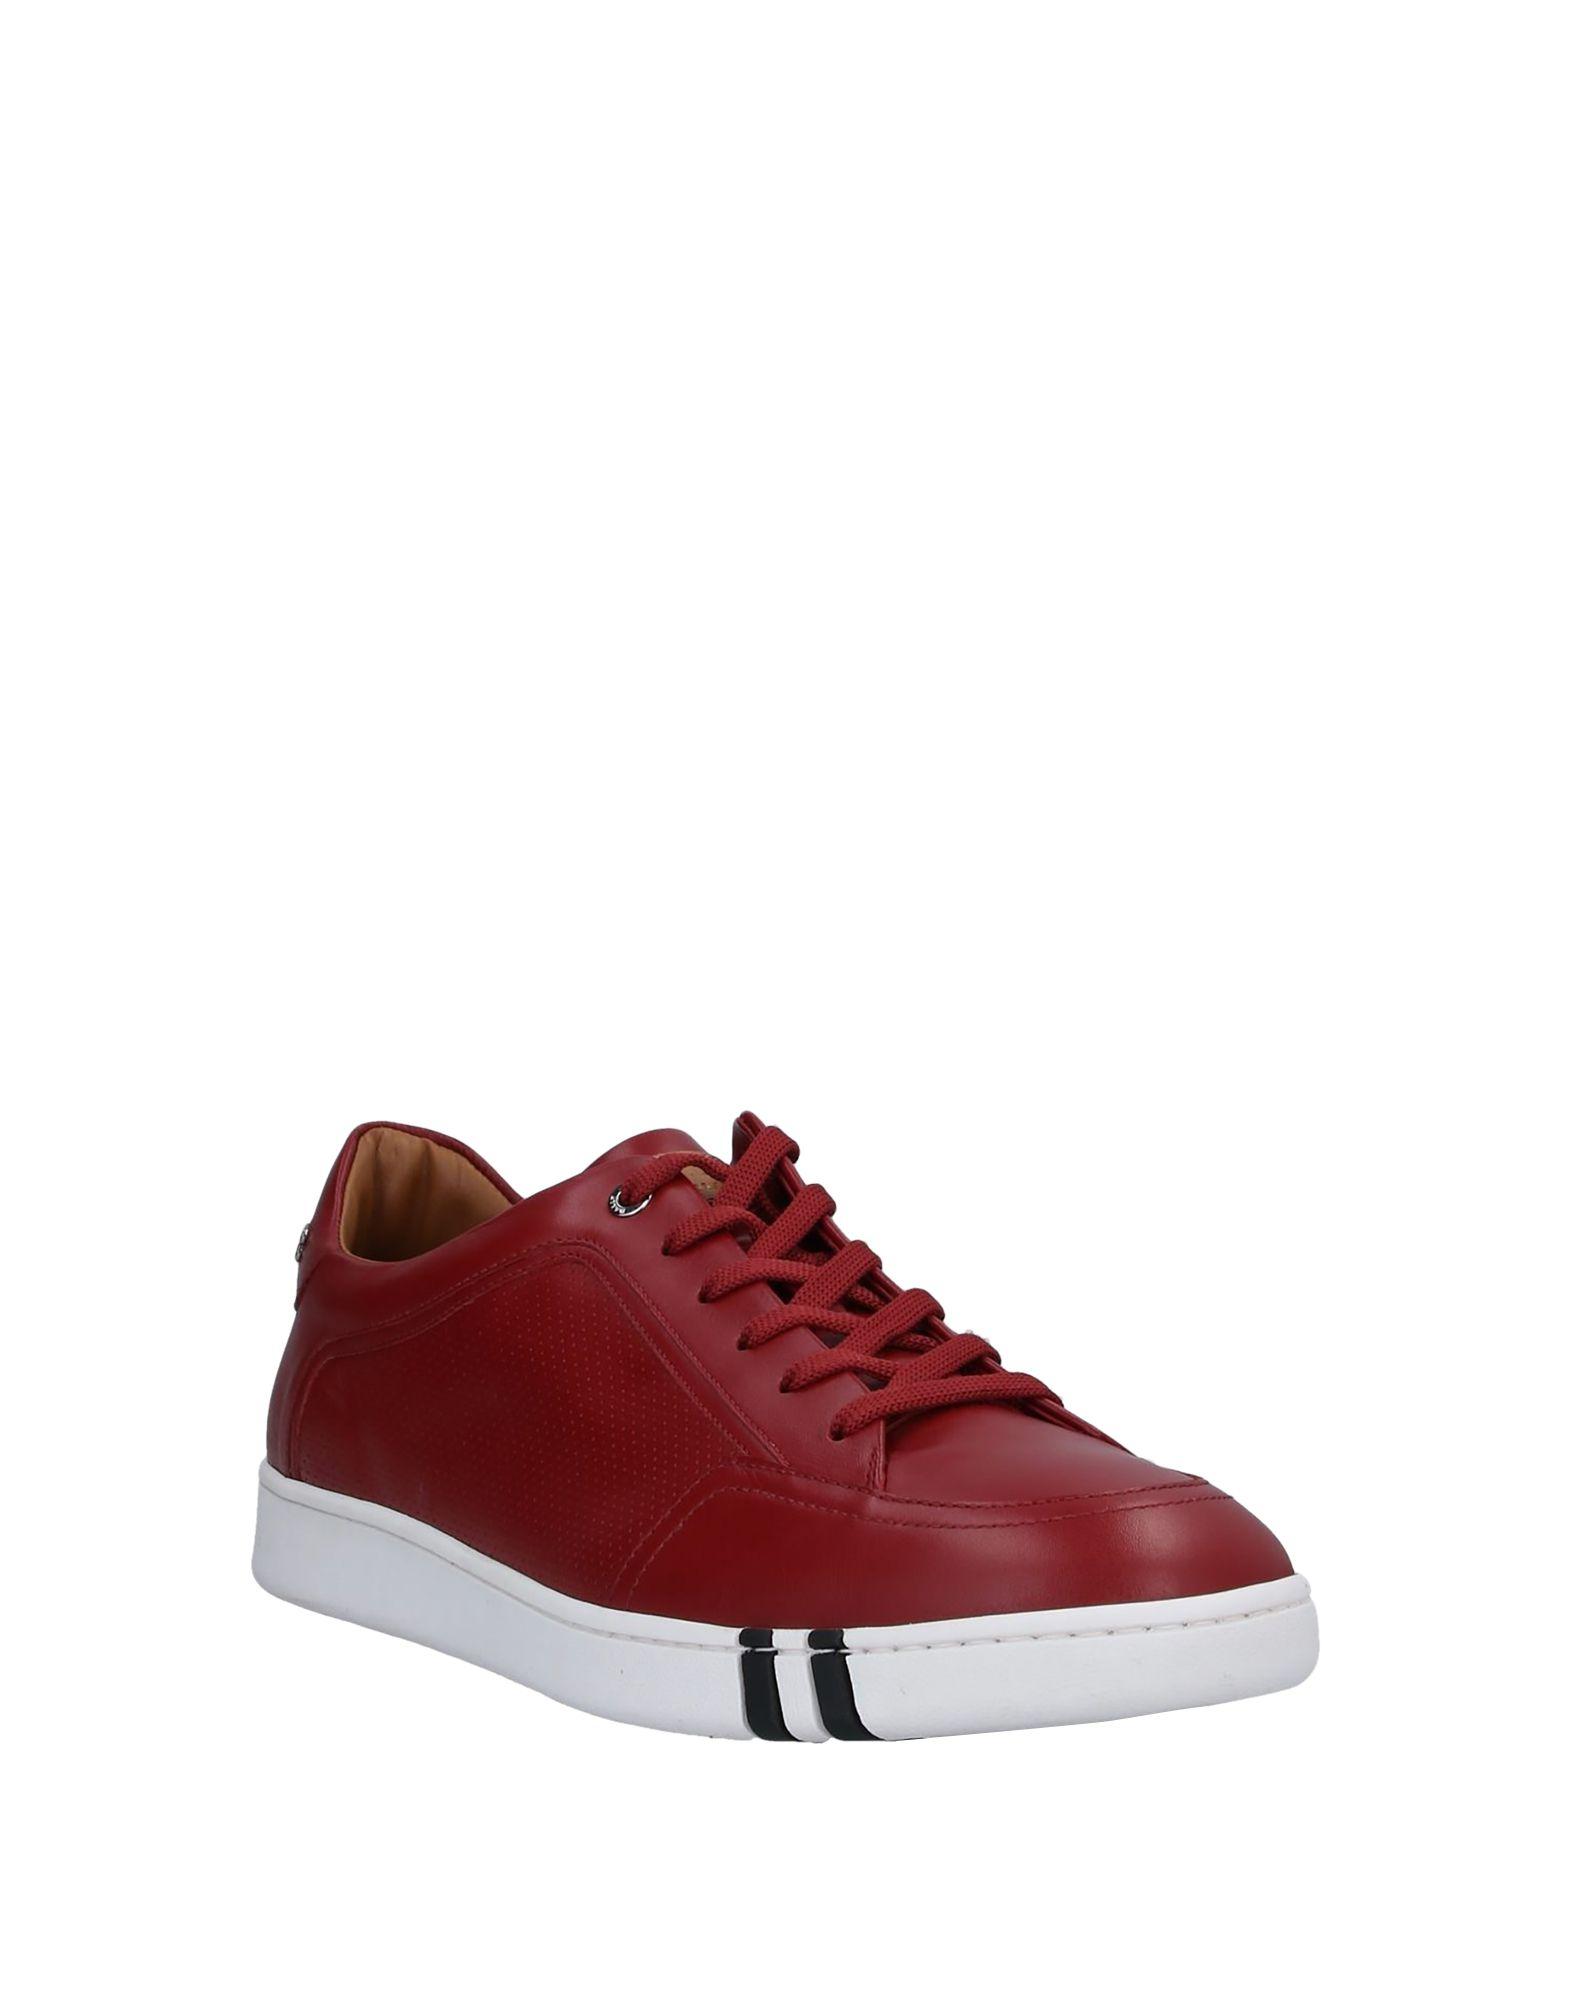 Bally Low-tops & Sneakers in Red for Men - Lyst